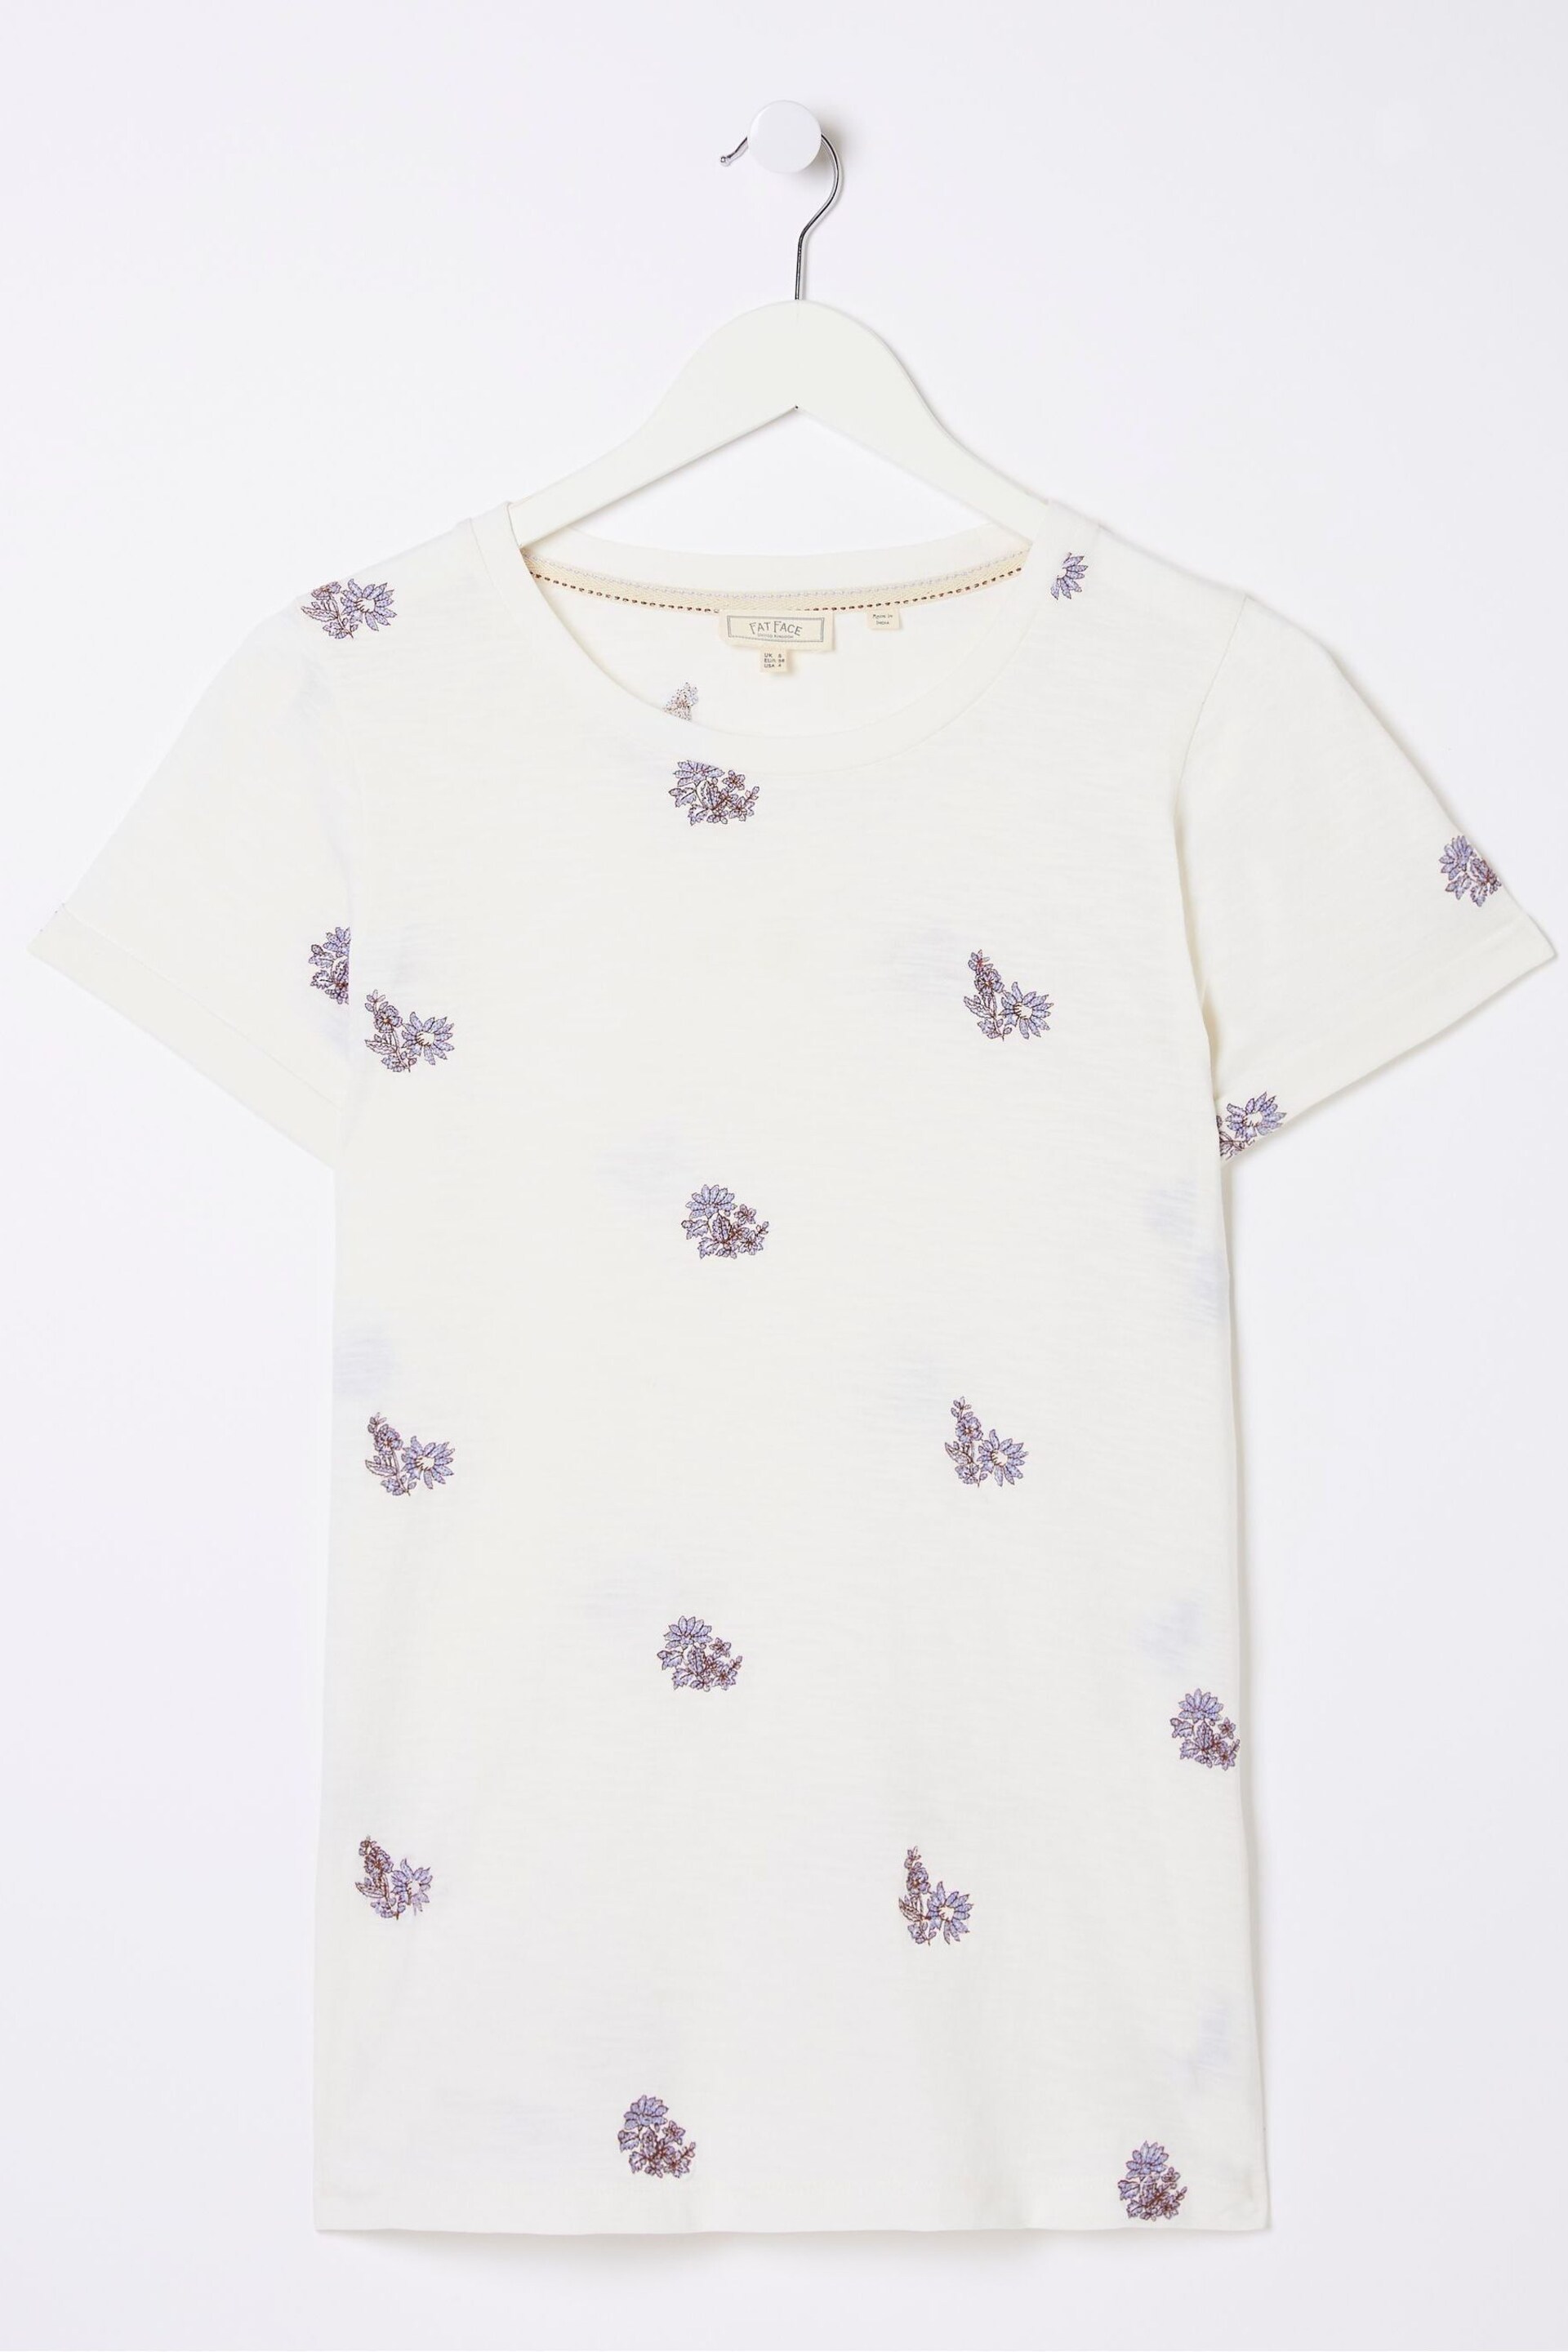 FatFace Natural Natalie Floral Embroidered T-Shirt - Image 4 of 4